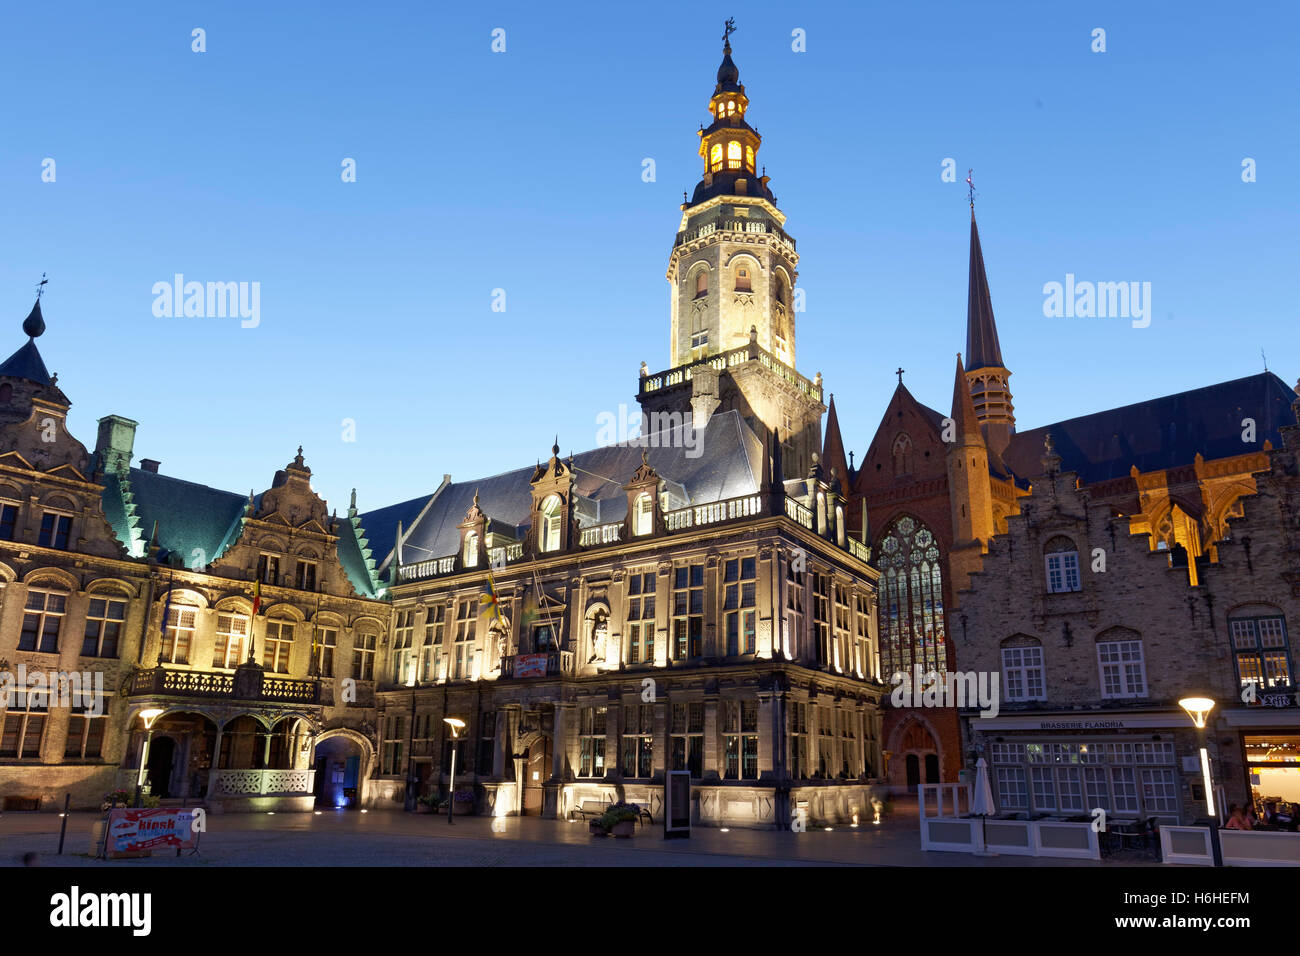 City Hall, Palace of Justice, and Belfry Sint-Walburgakerk at The Great Market Square of Veurne, at twilight Stock Photo